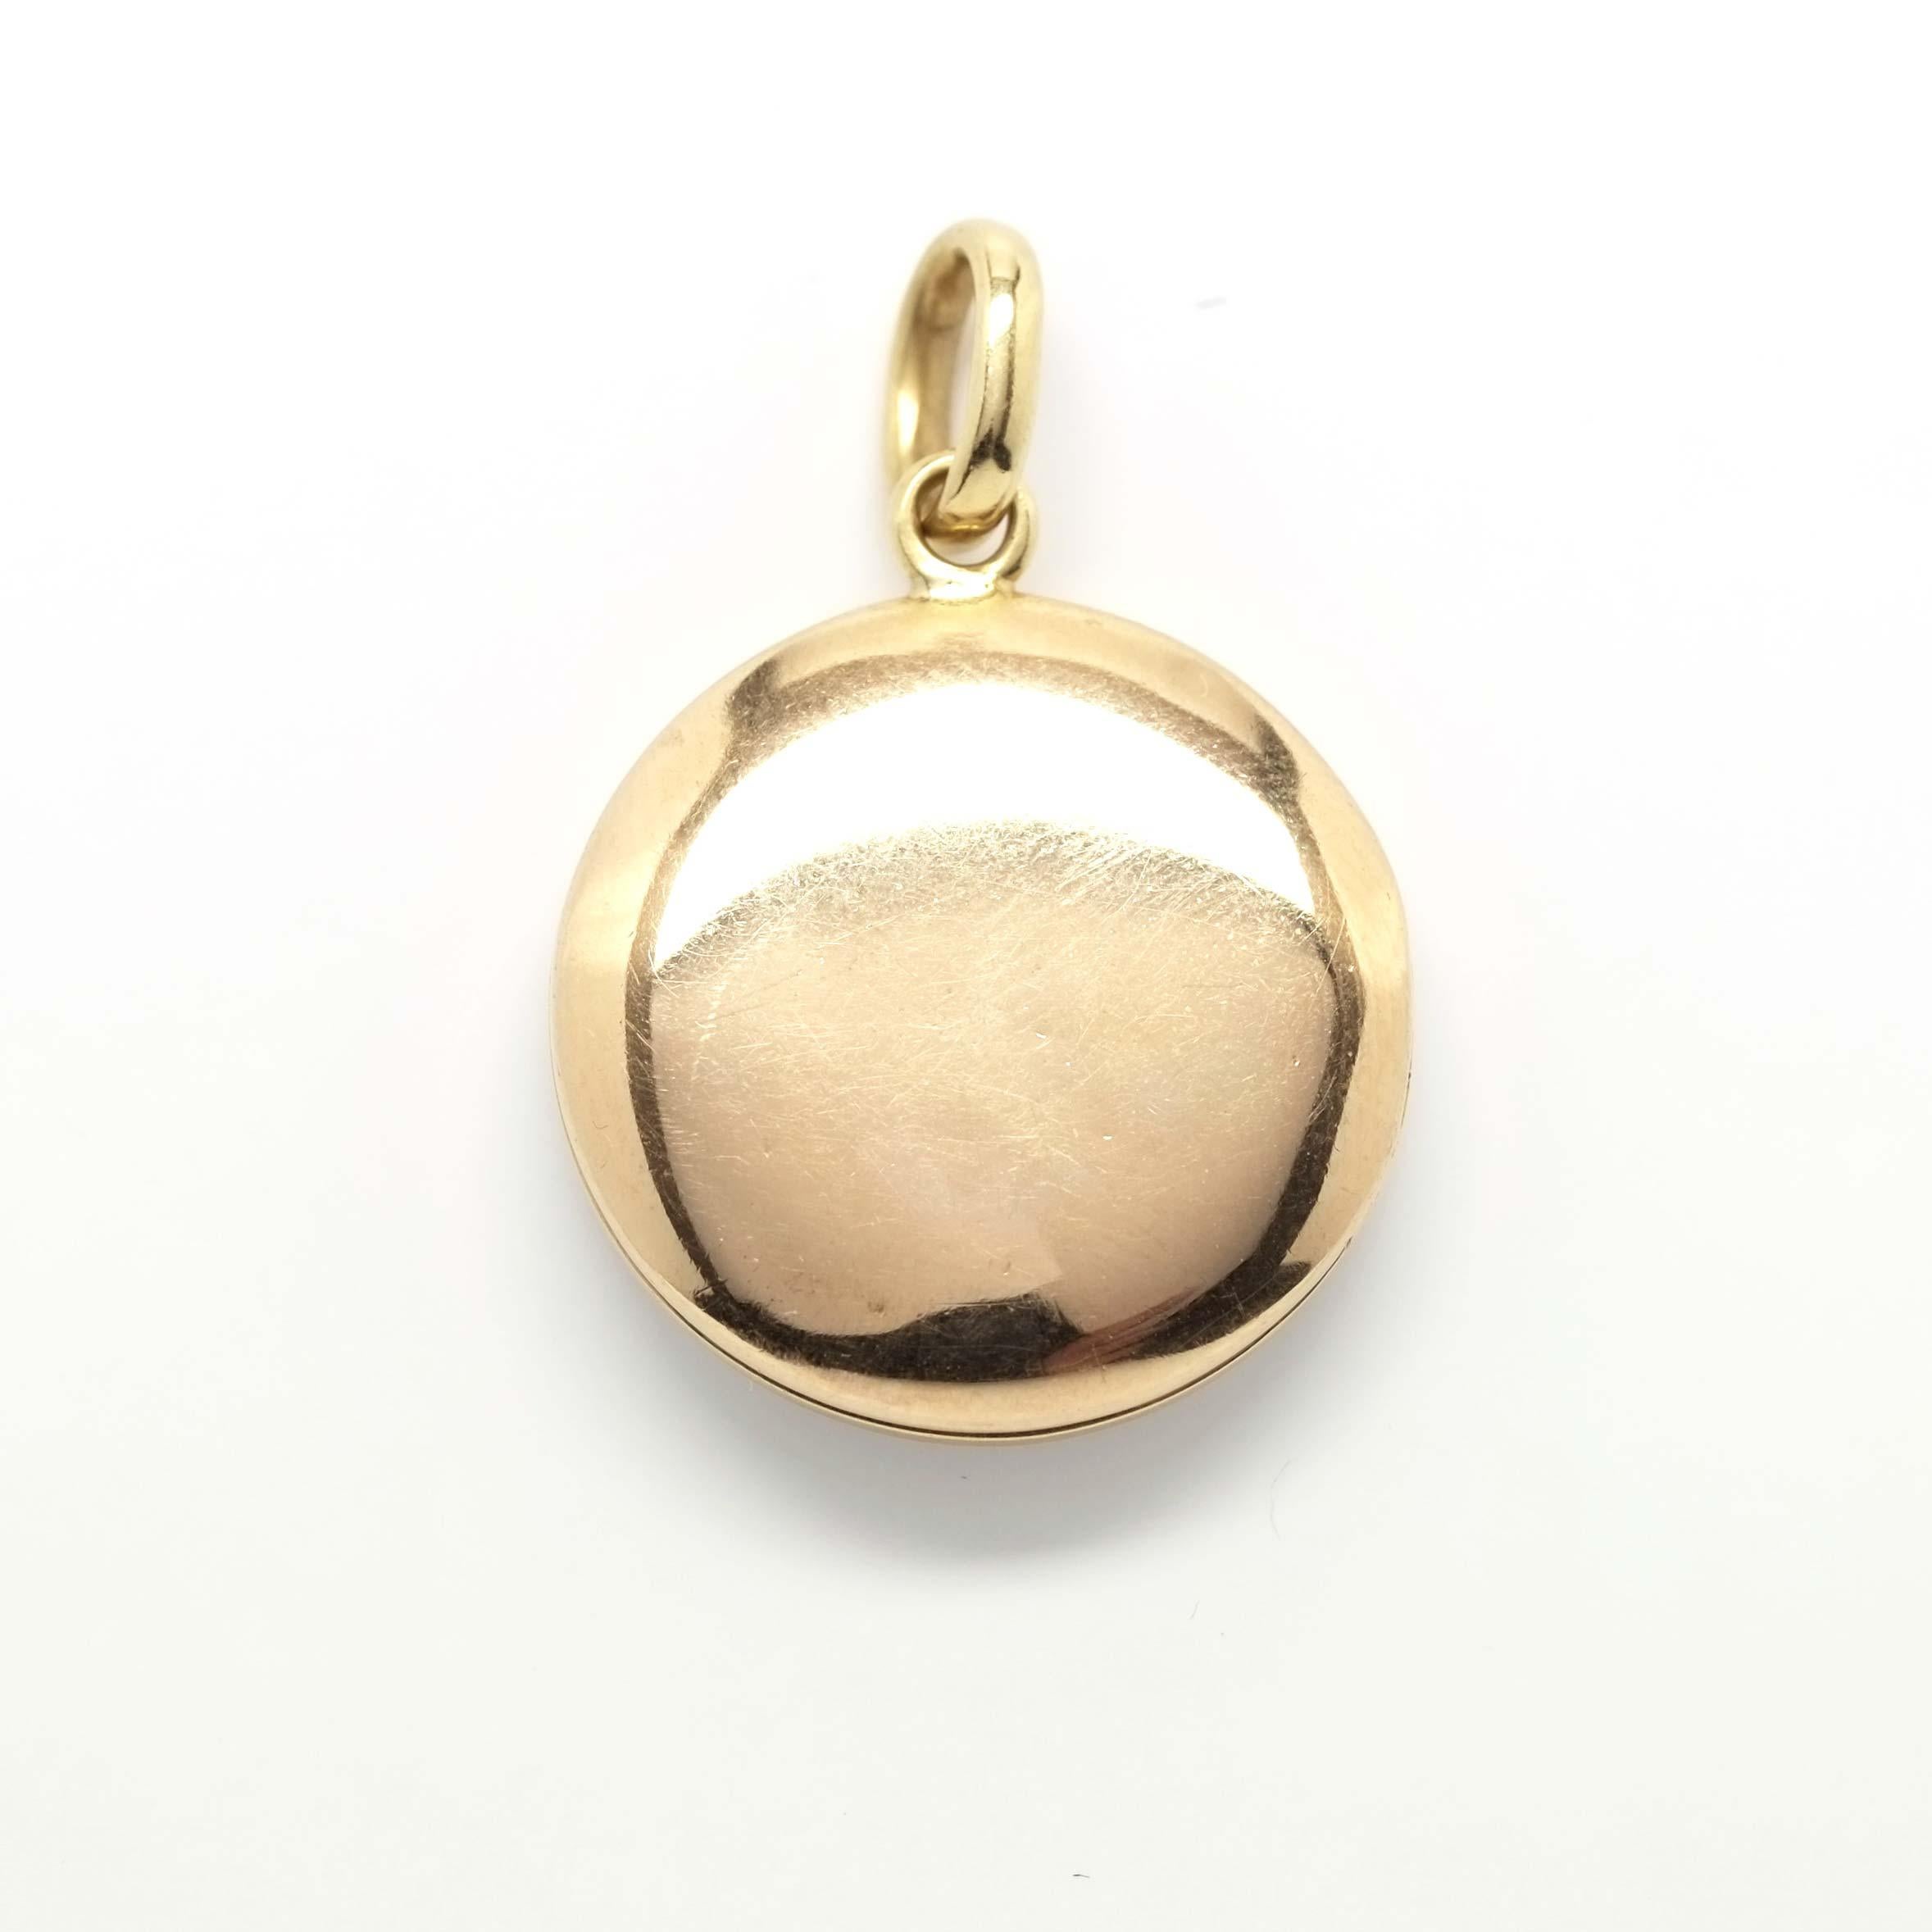 The Locket, which became a must-have in the second half of the nineteenth century, has always had the function of keeping important memories close to the heart. This pendant, in particular, was probably made in Italy around the 70s in yellow gold